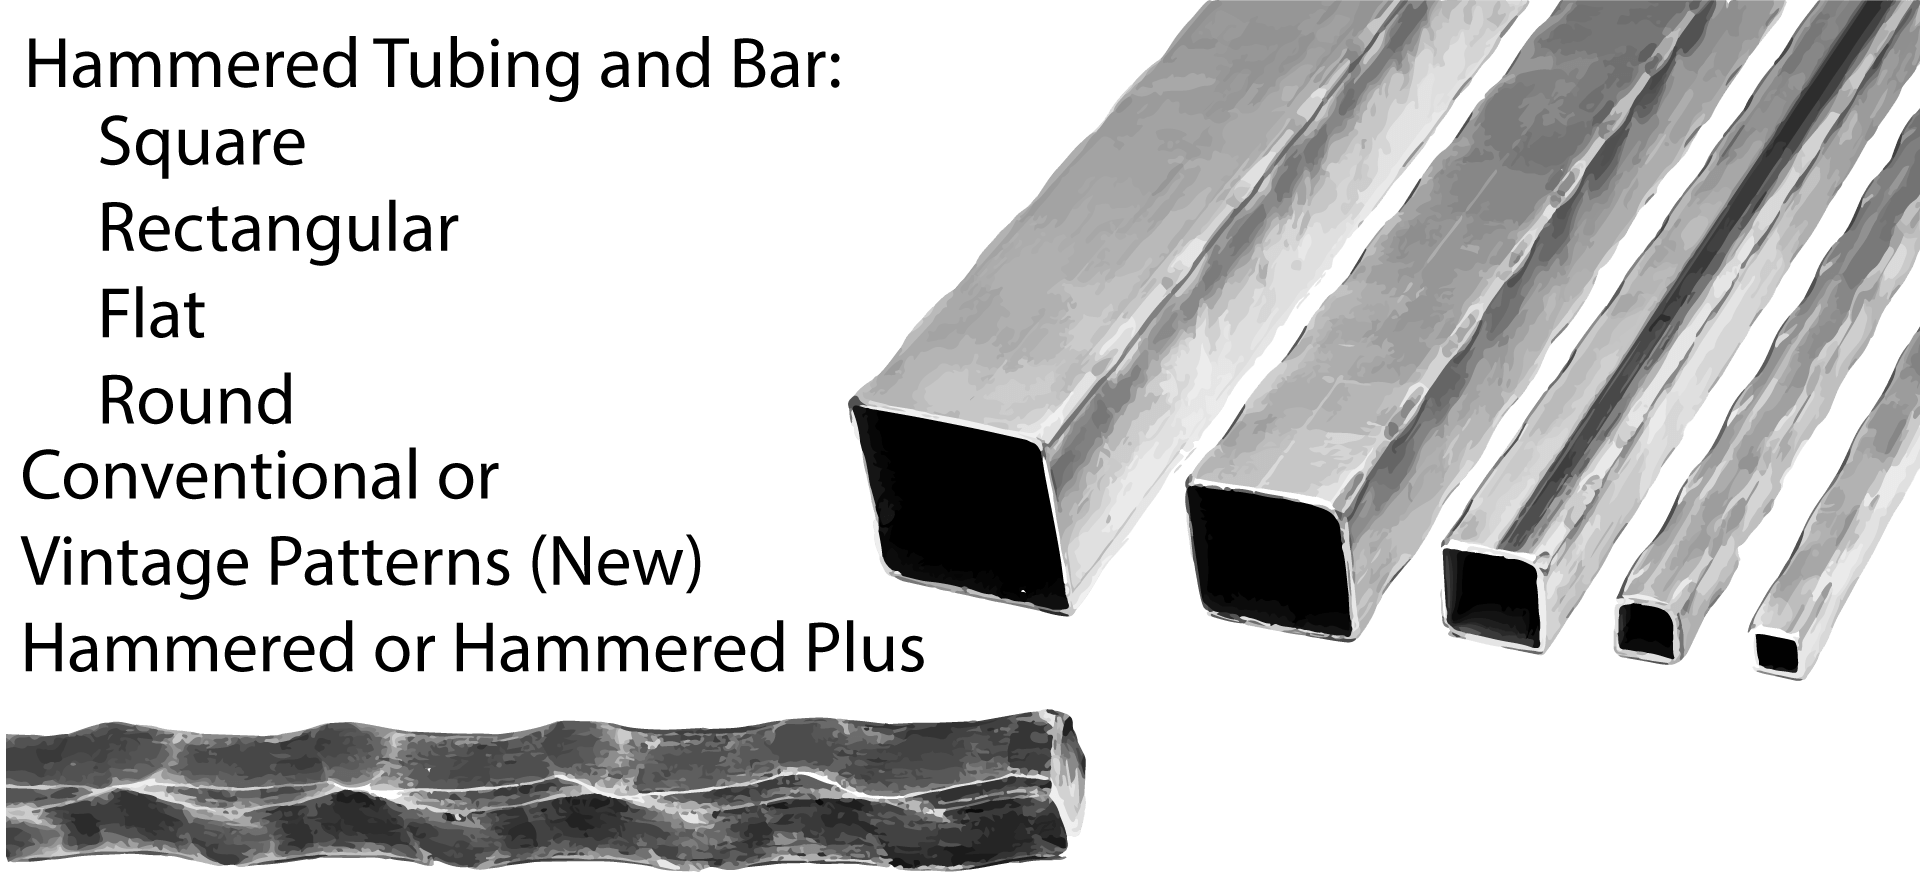 Hammered Bar and Tubing. Flat Bar, Round Solid, Square Solid, Rectangular Tube, Square Tube, Hot Forged Embossed Bar Stock. Wide variety and Excellent Quality from Superior Ornamental Supply.